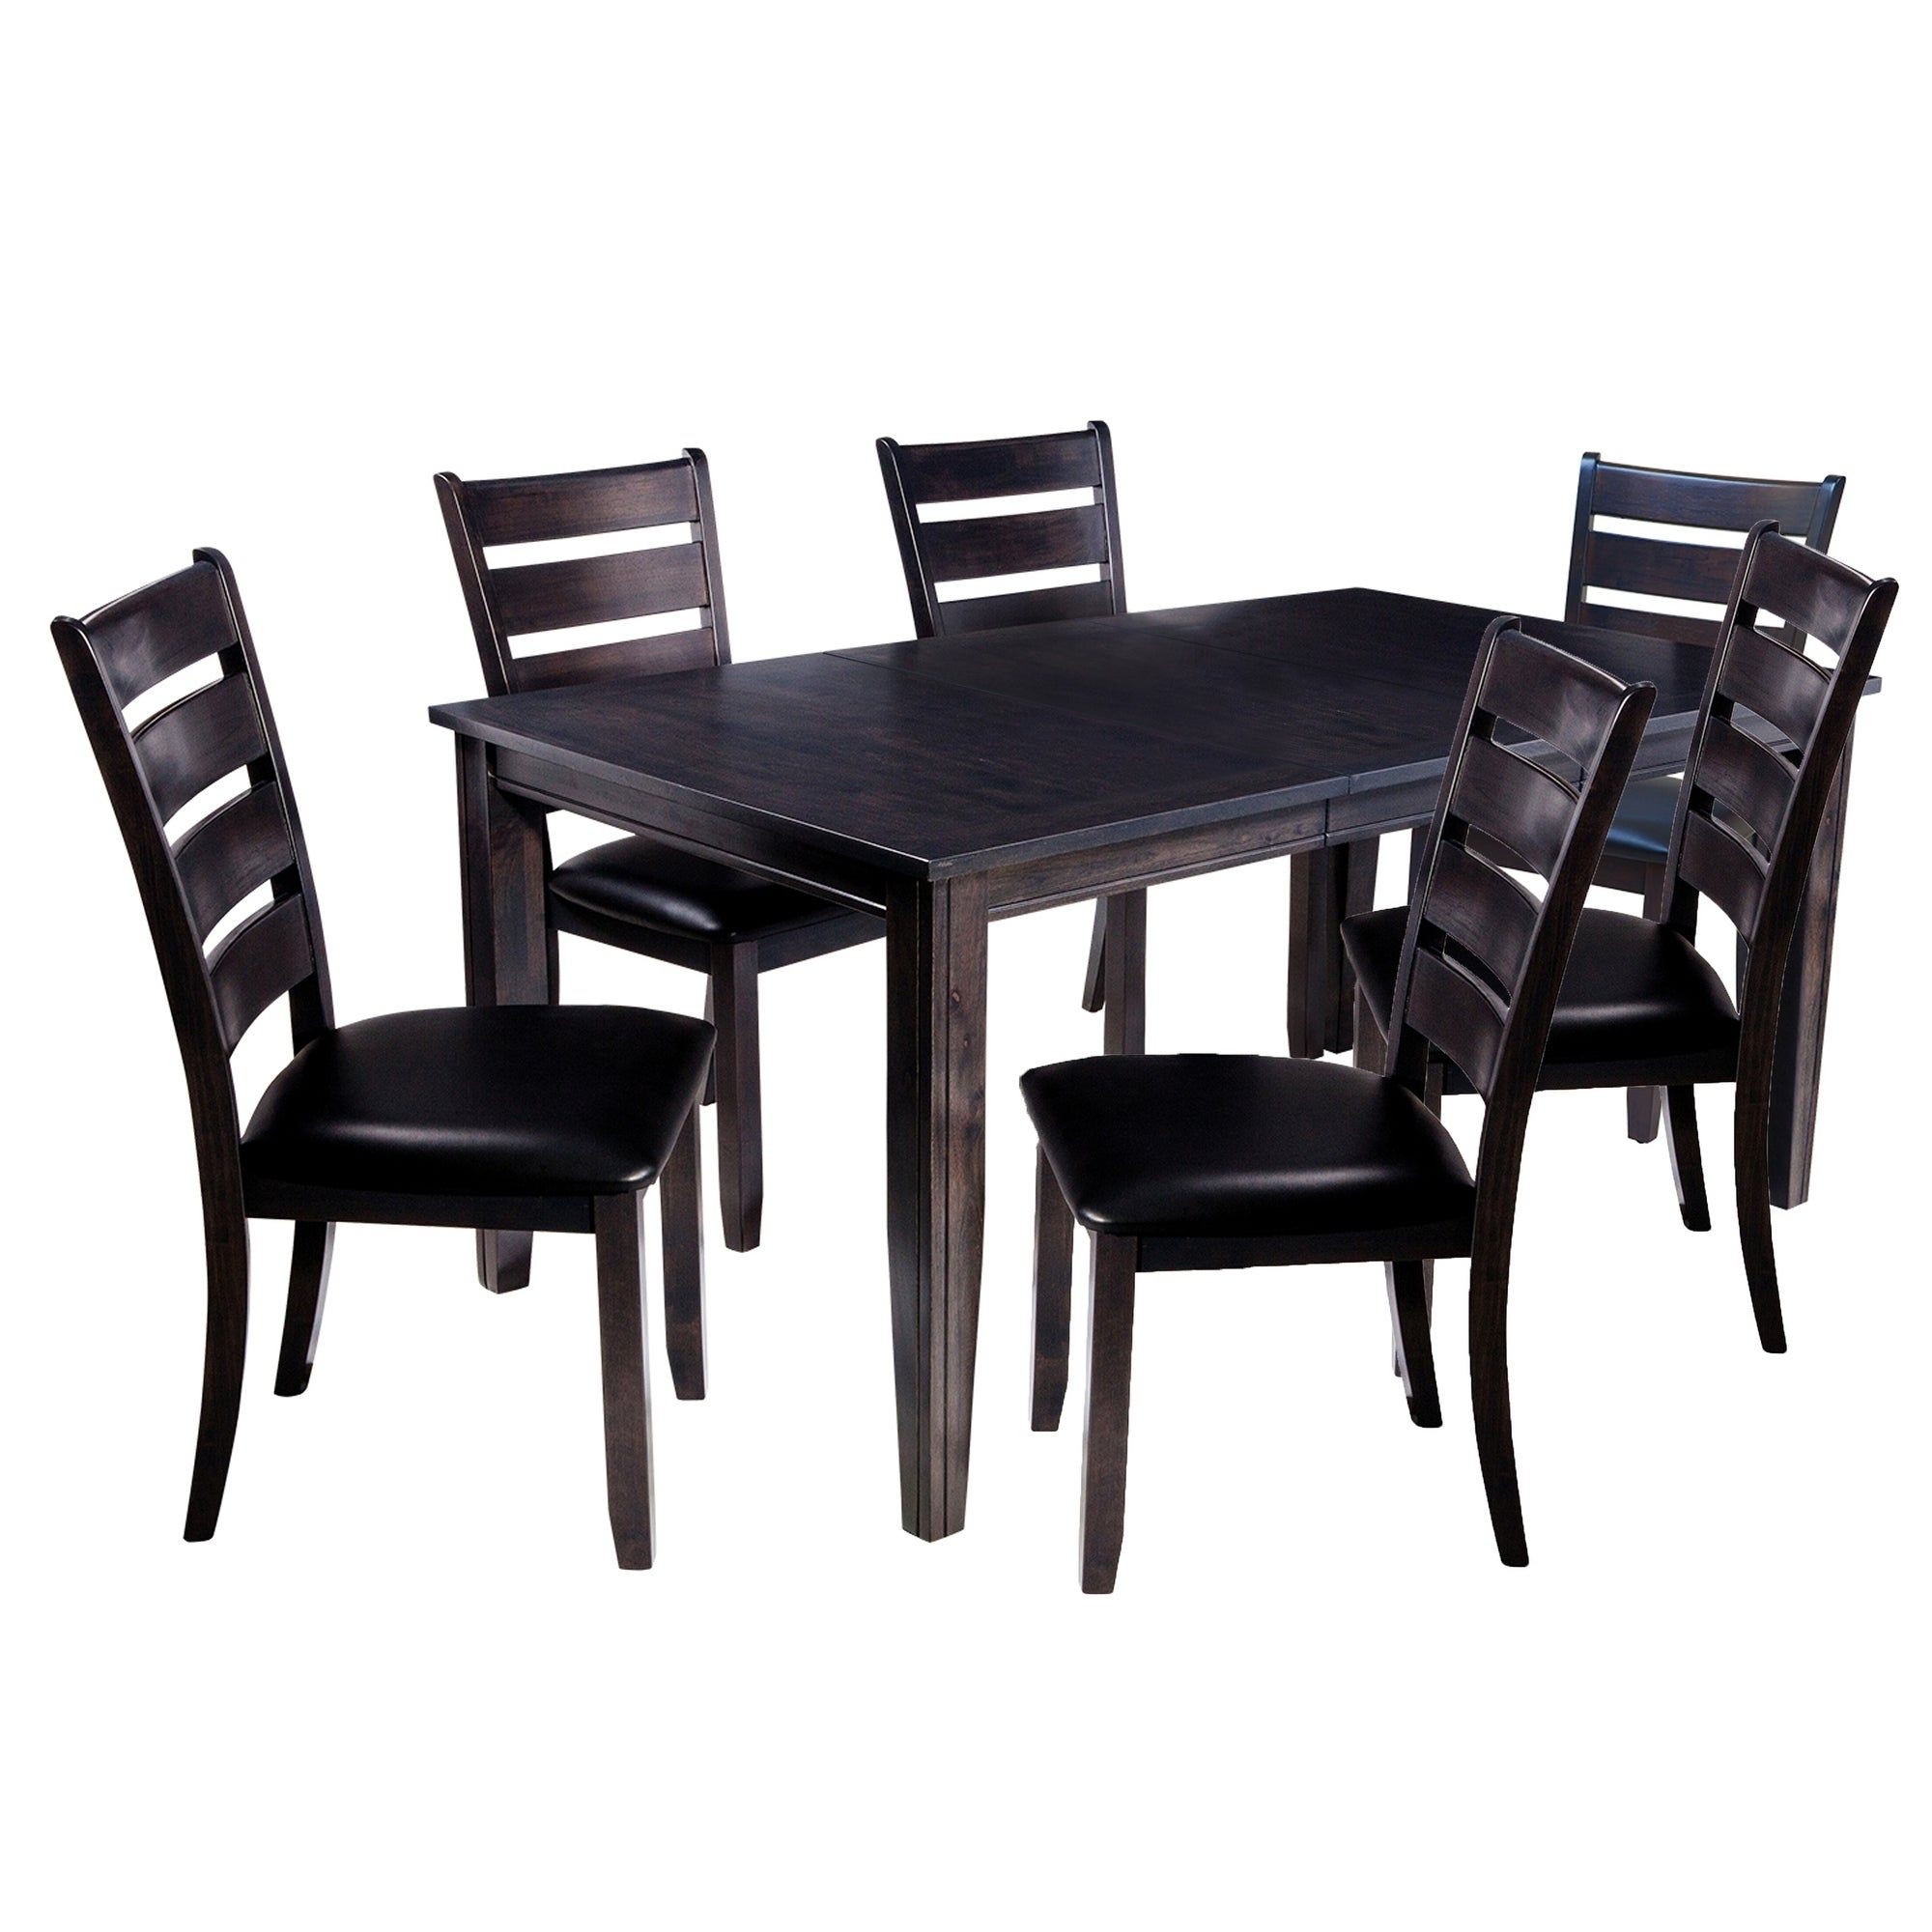 Adan 5 Piece Solid Wood Dining Sets (set Of 5) Intended For 2019 Shop 7 Piece Solid Wood Dining Set "aden", Modern Kitchen Table Set (View 11 of 25)